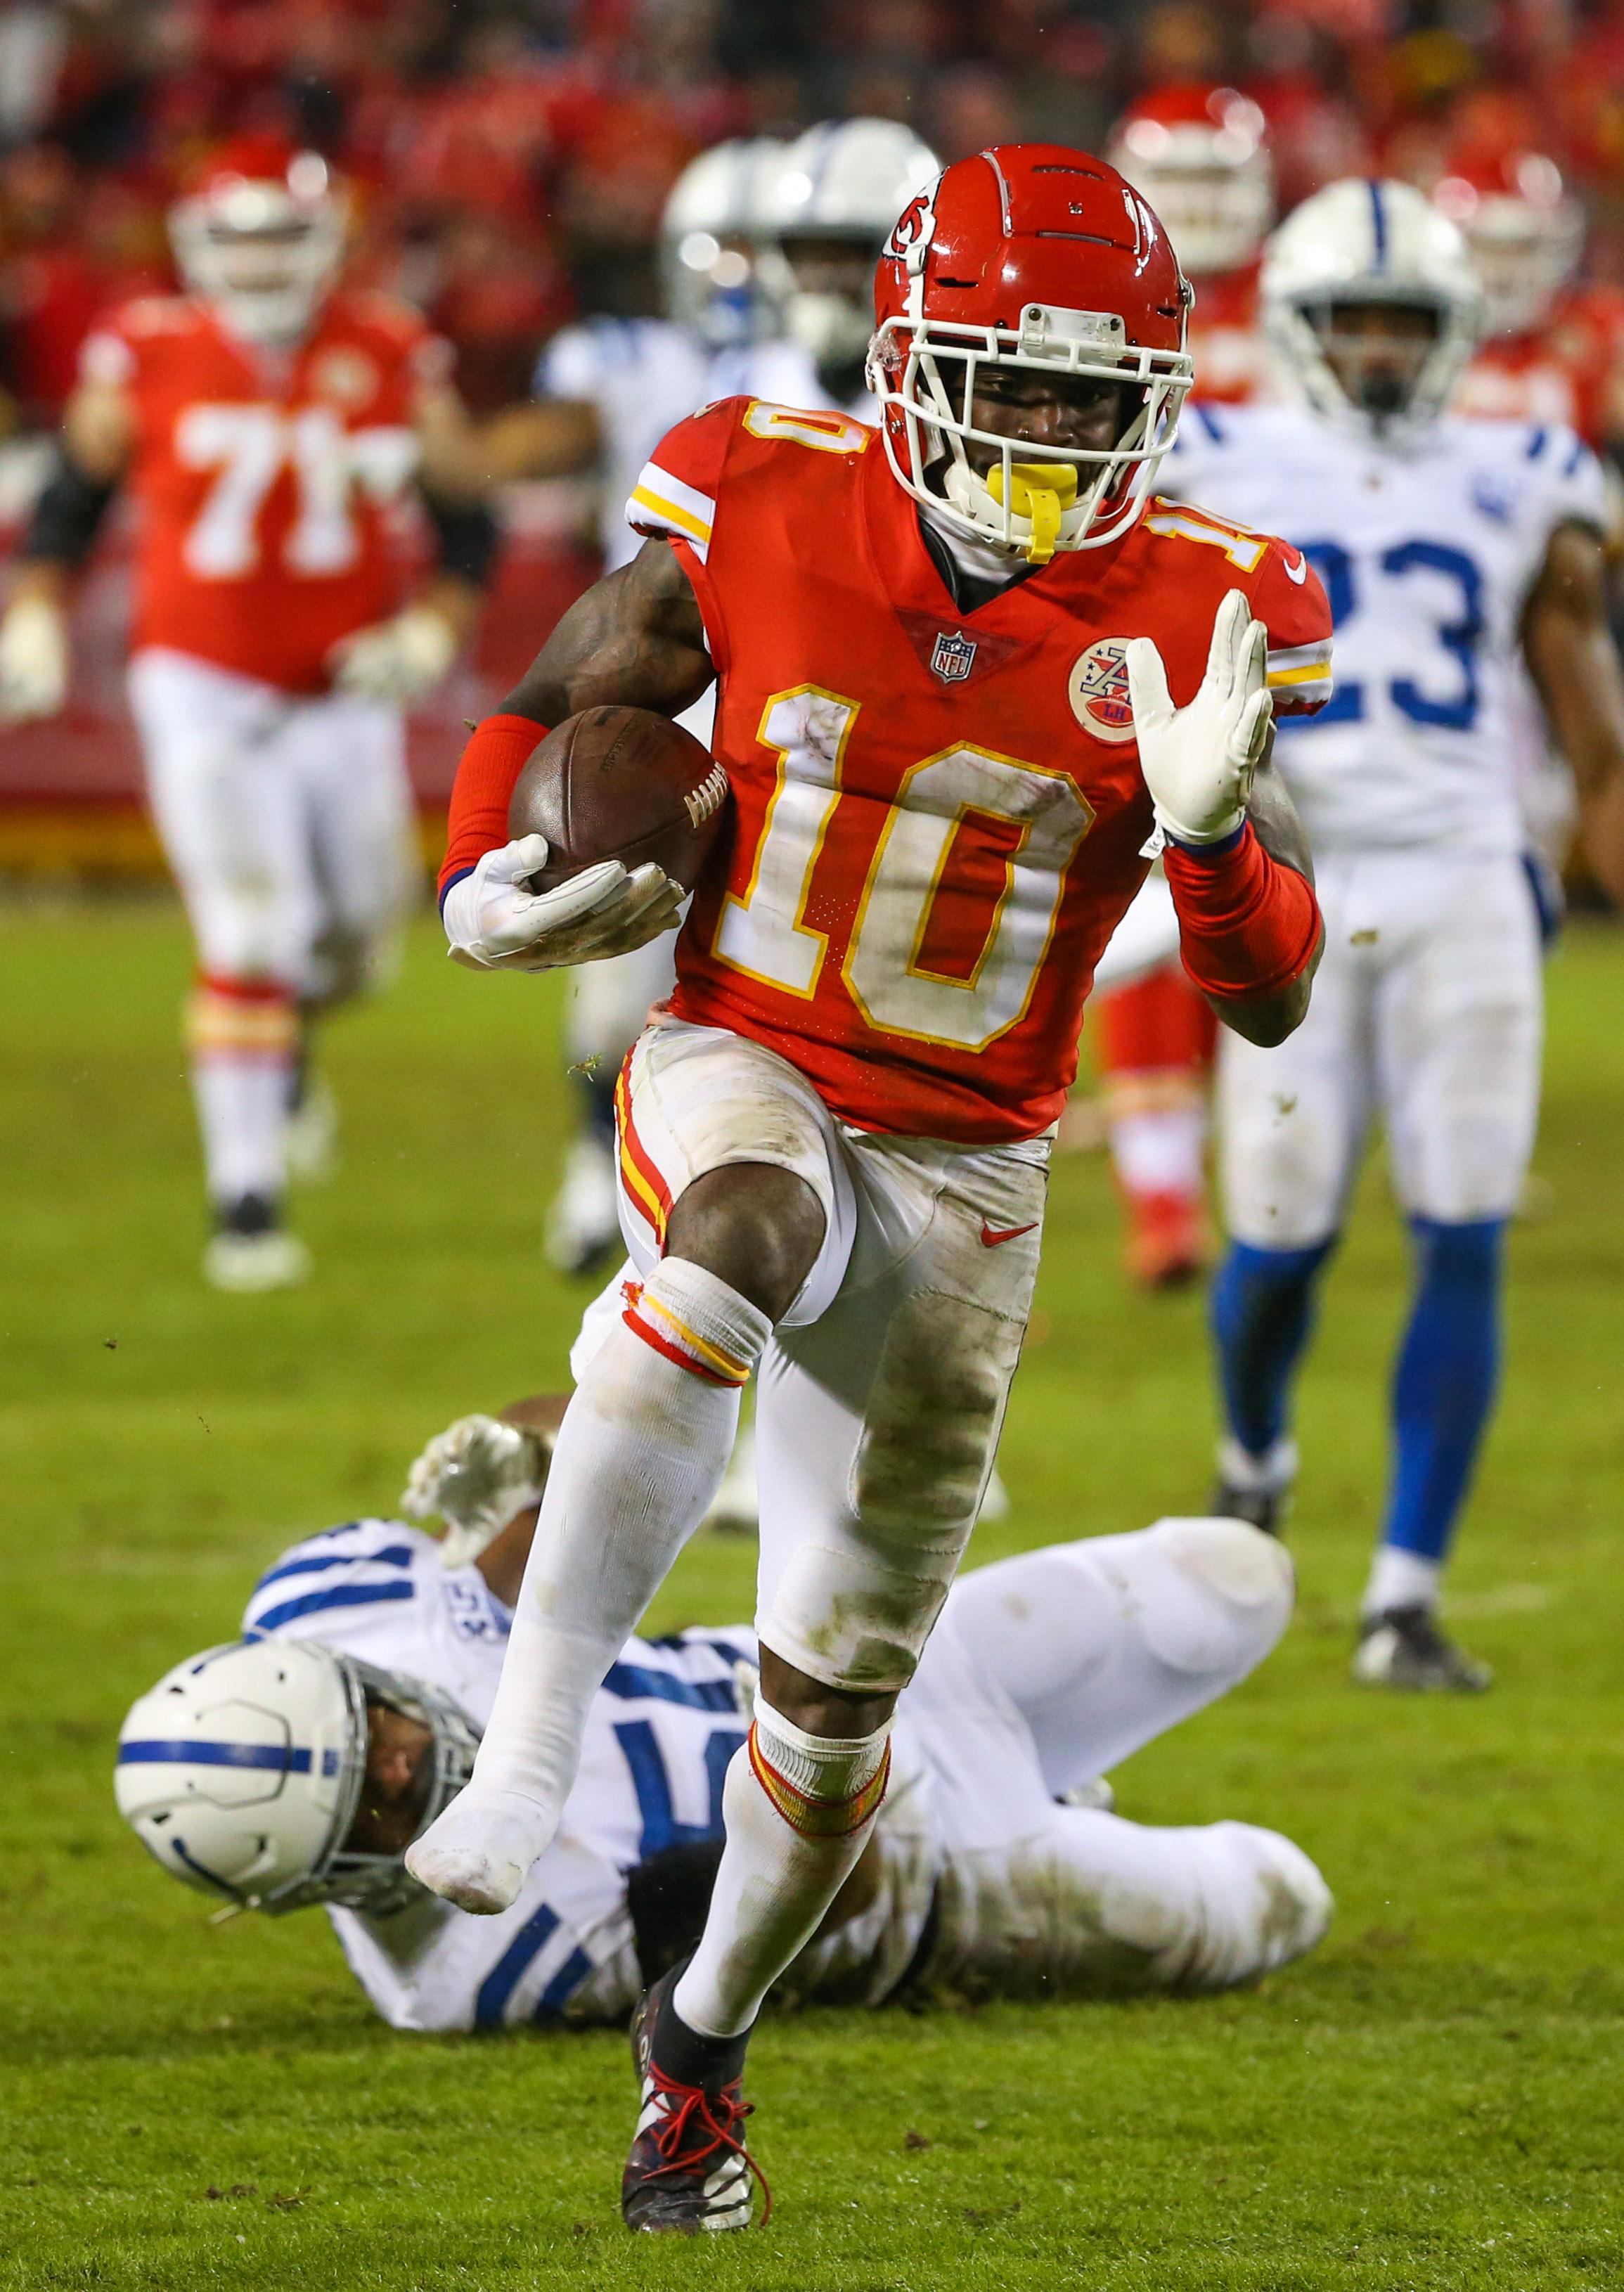 Chiefs' WR Tyreek Hill to meet with NFL investigators this week, according  to report